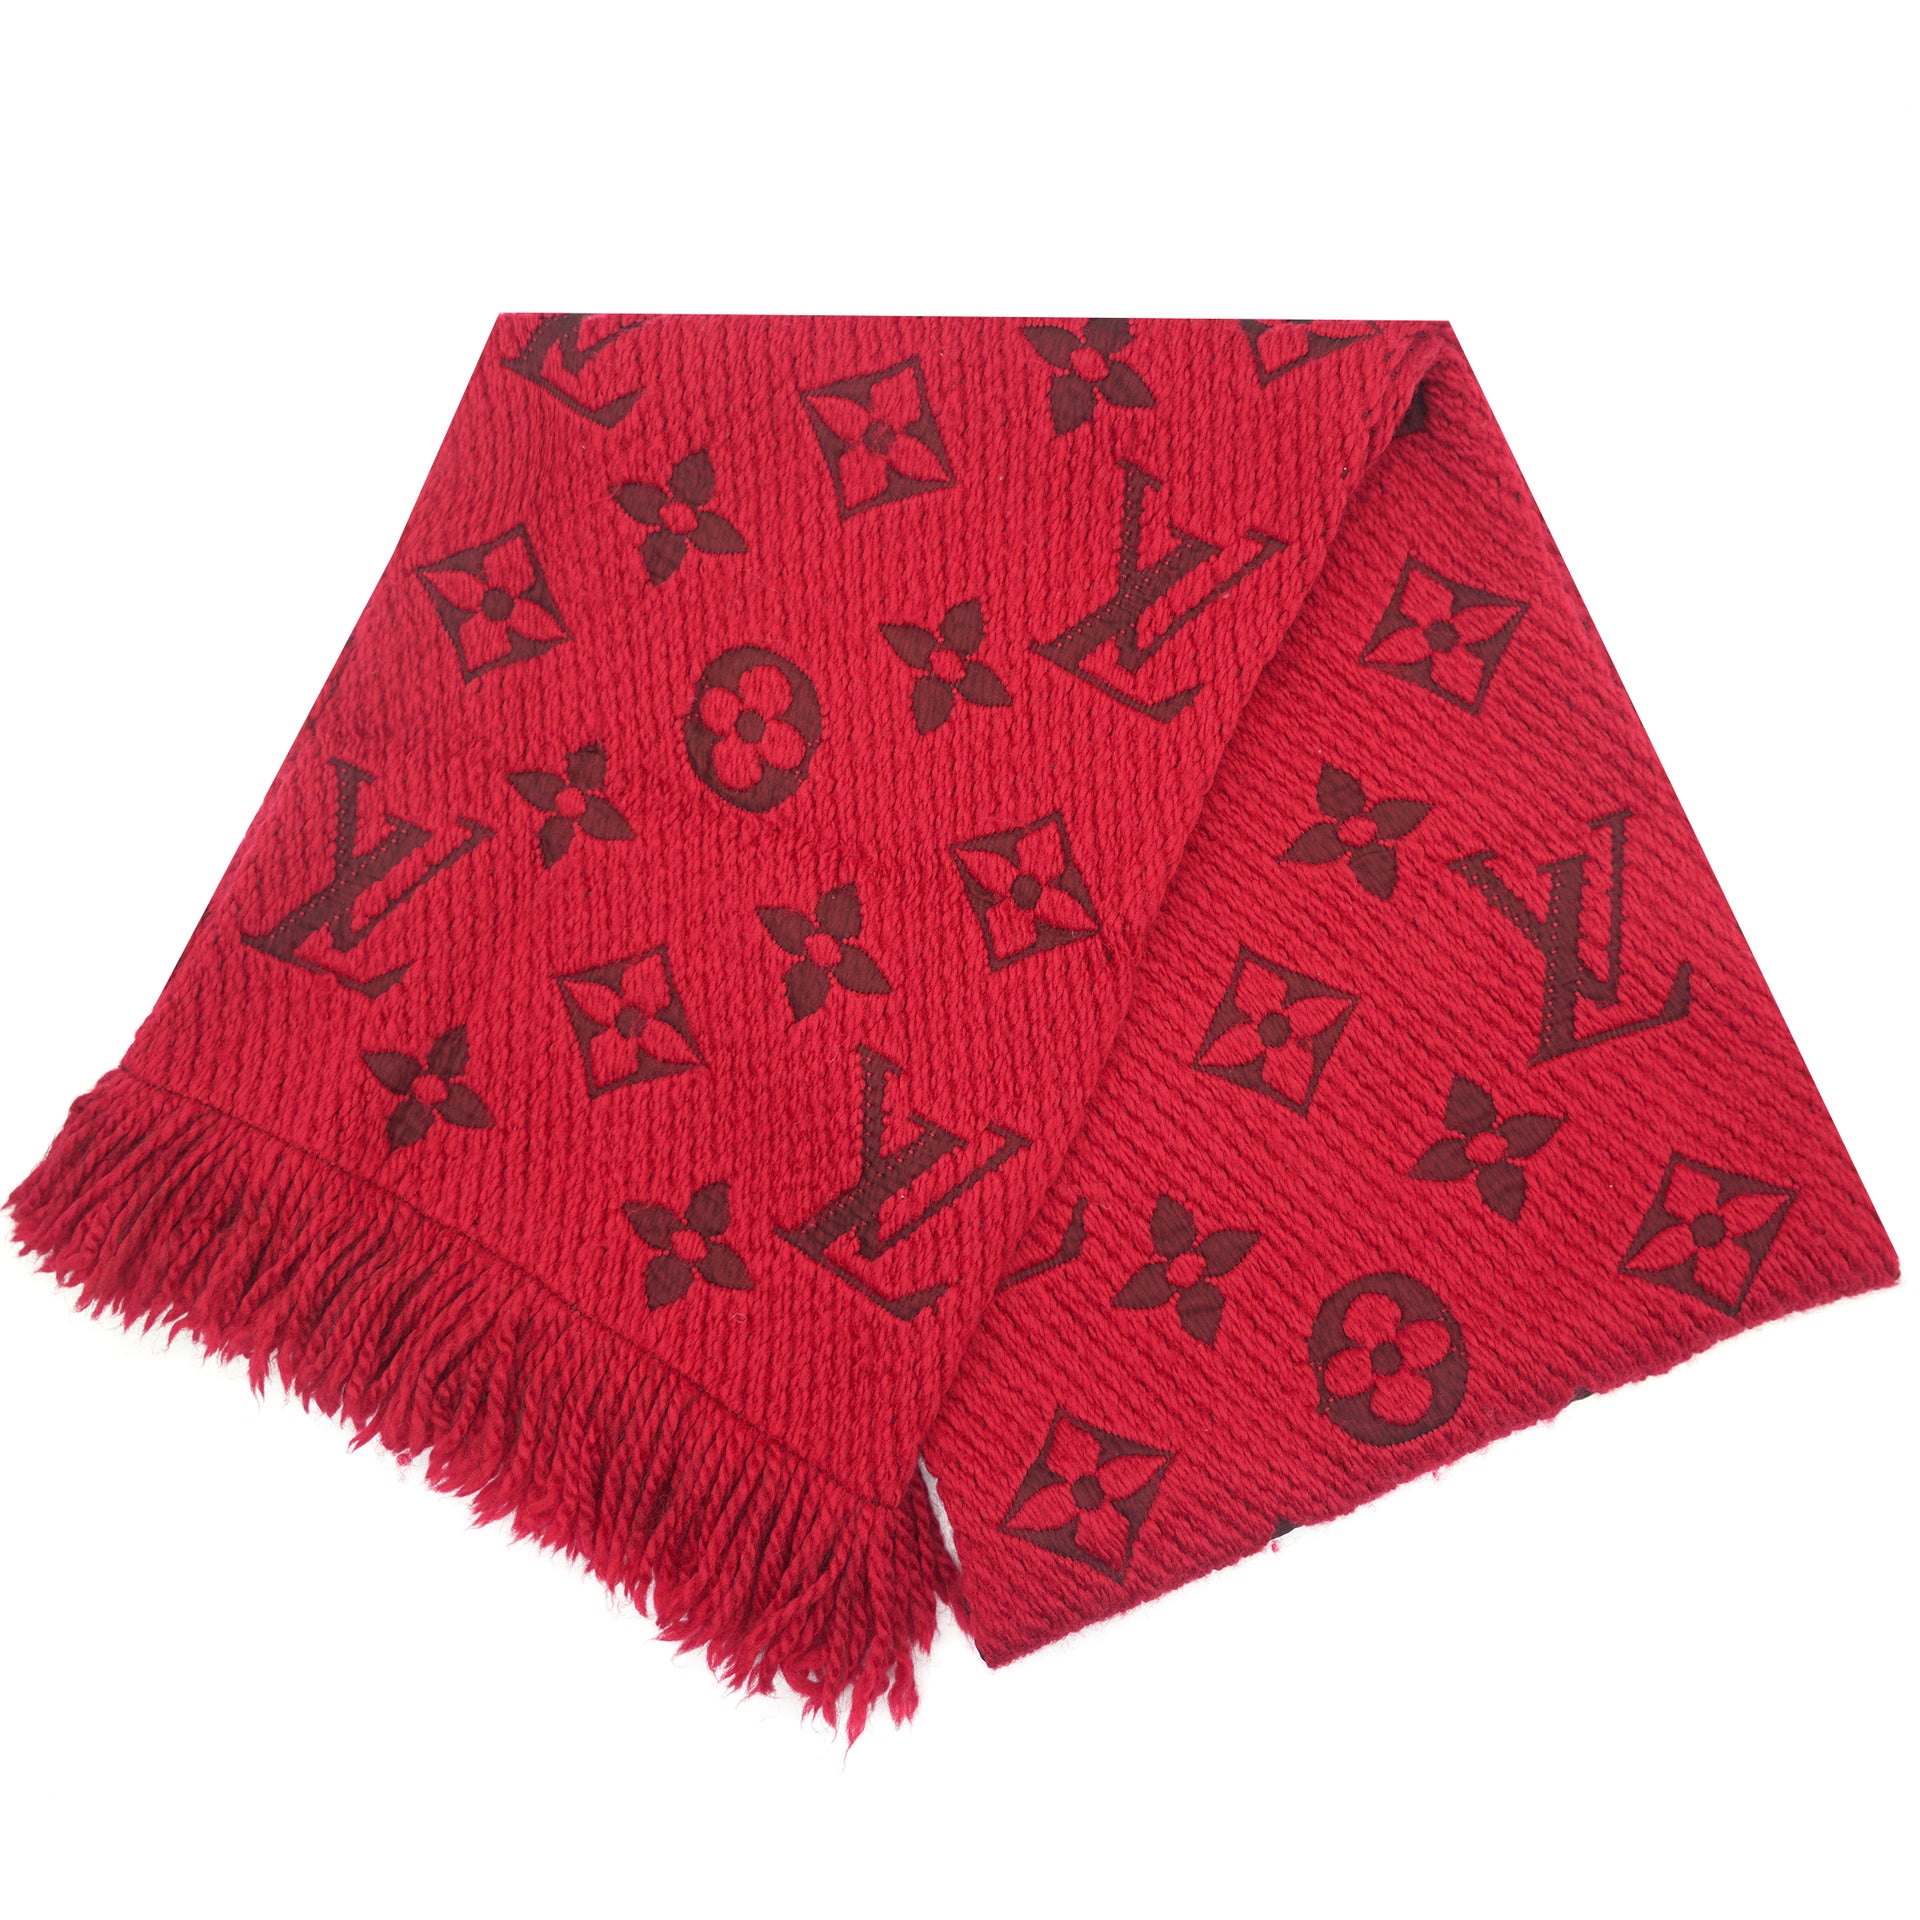 Louis Vuitton Authenticated Silk Scarf